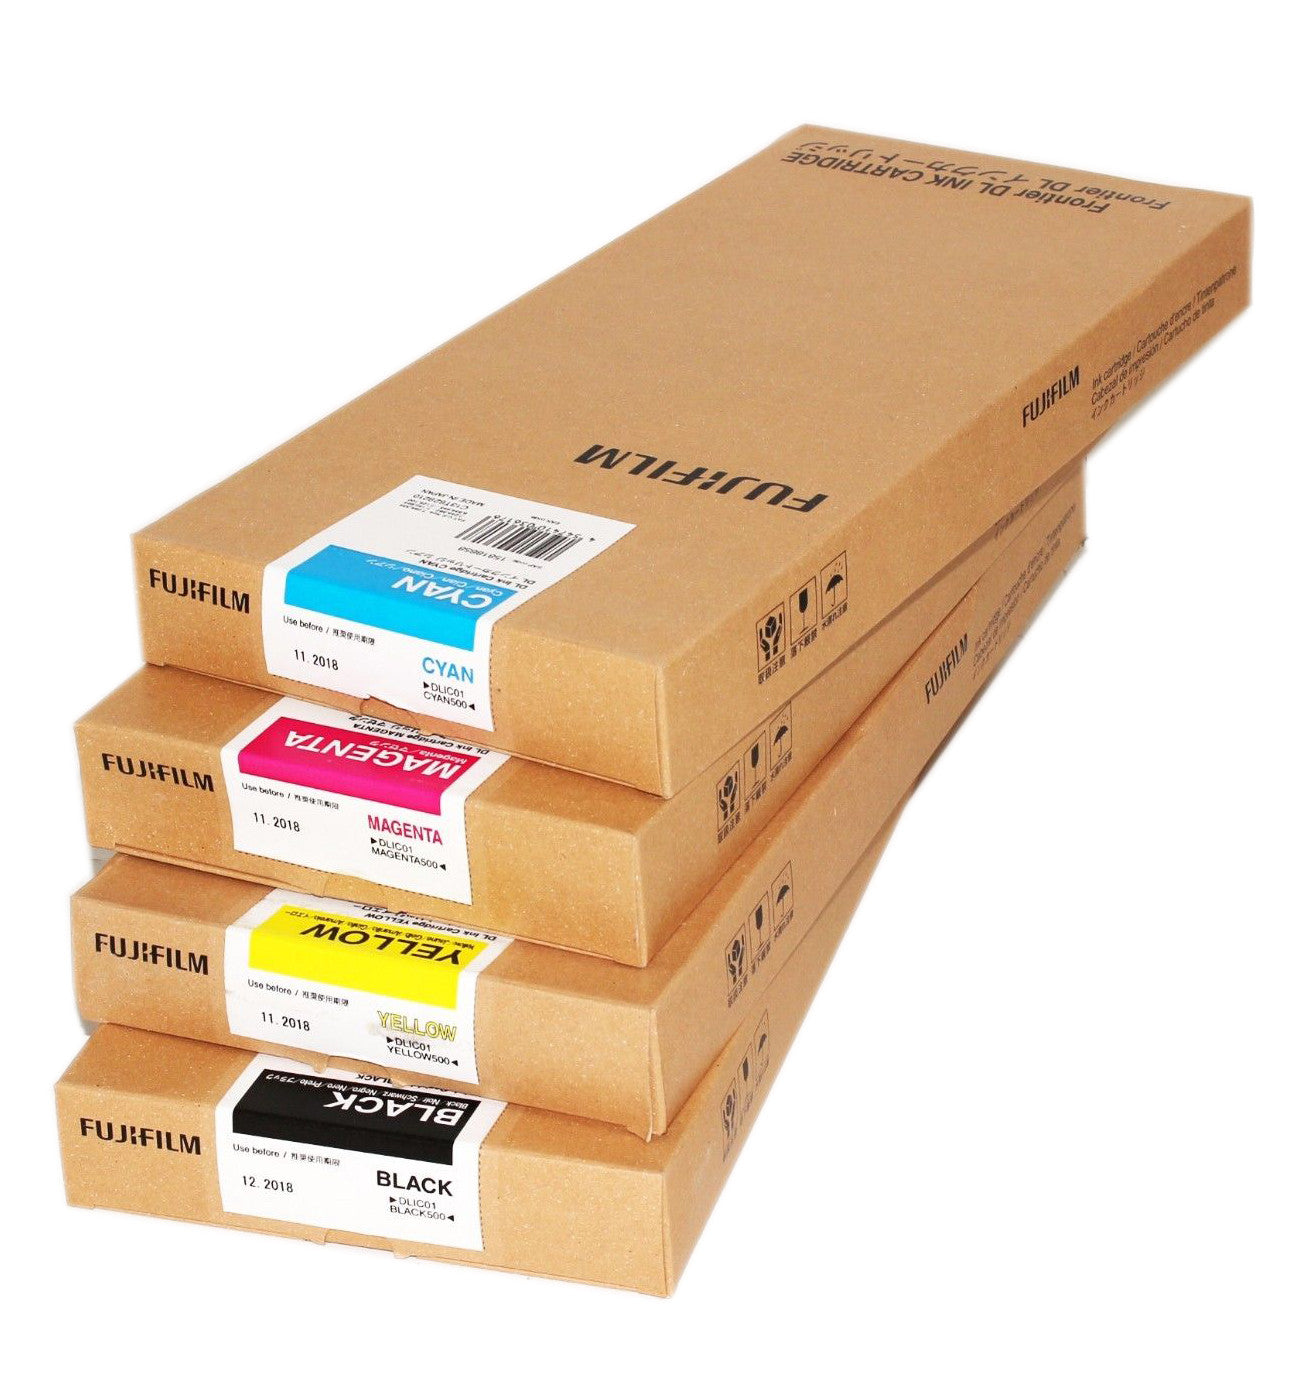 FujiFilm DL430 Ink Cartridges - 500ml for Frontier DL-430 (Set of 4) "NEW"